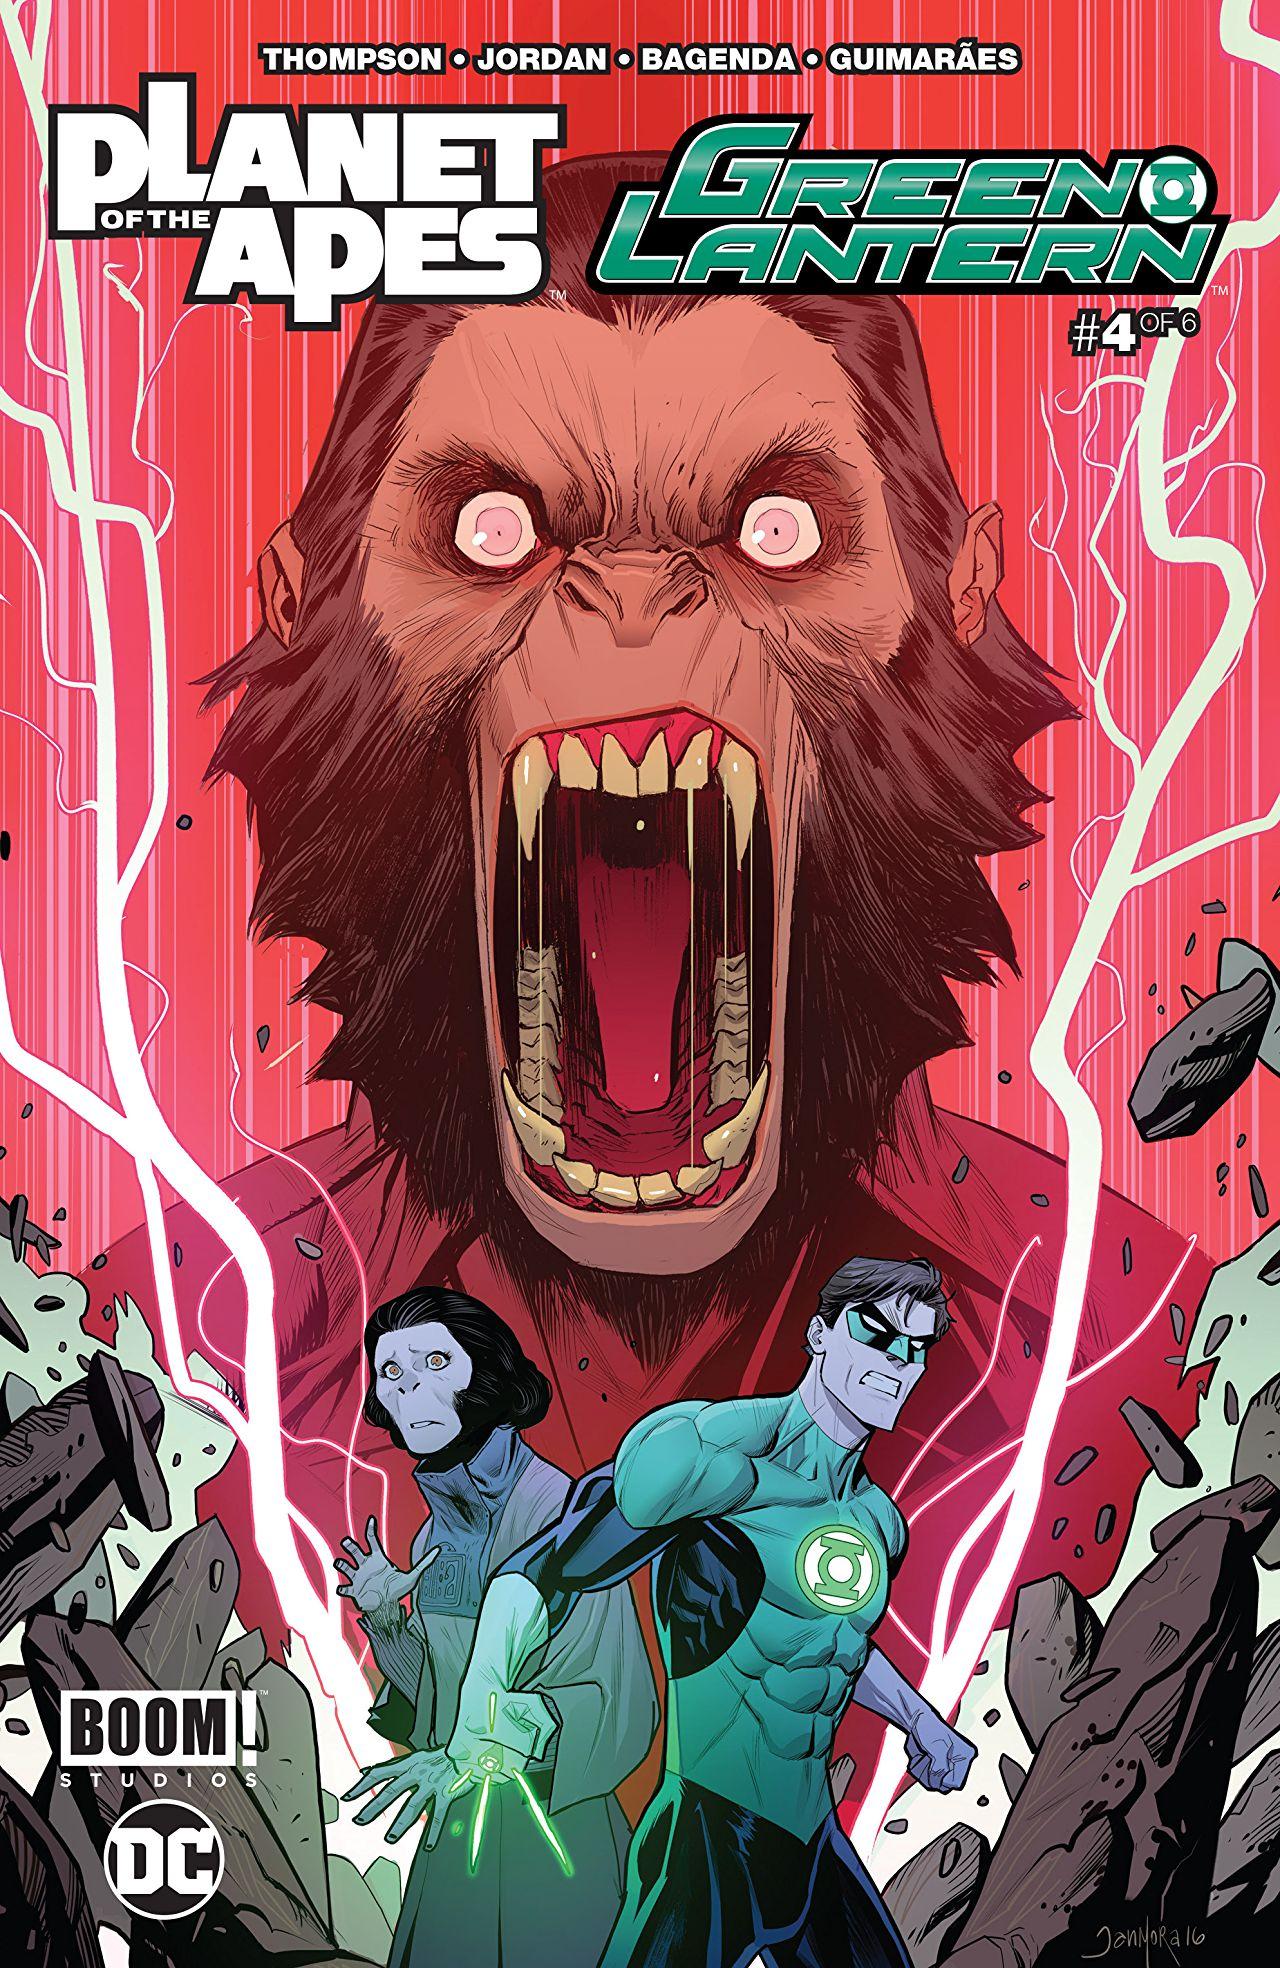 Planet of the Apes/Green Lantern Vol. 1 #4